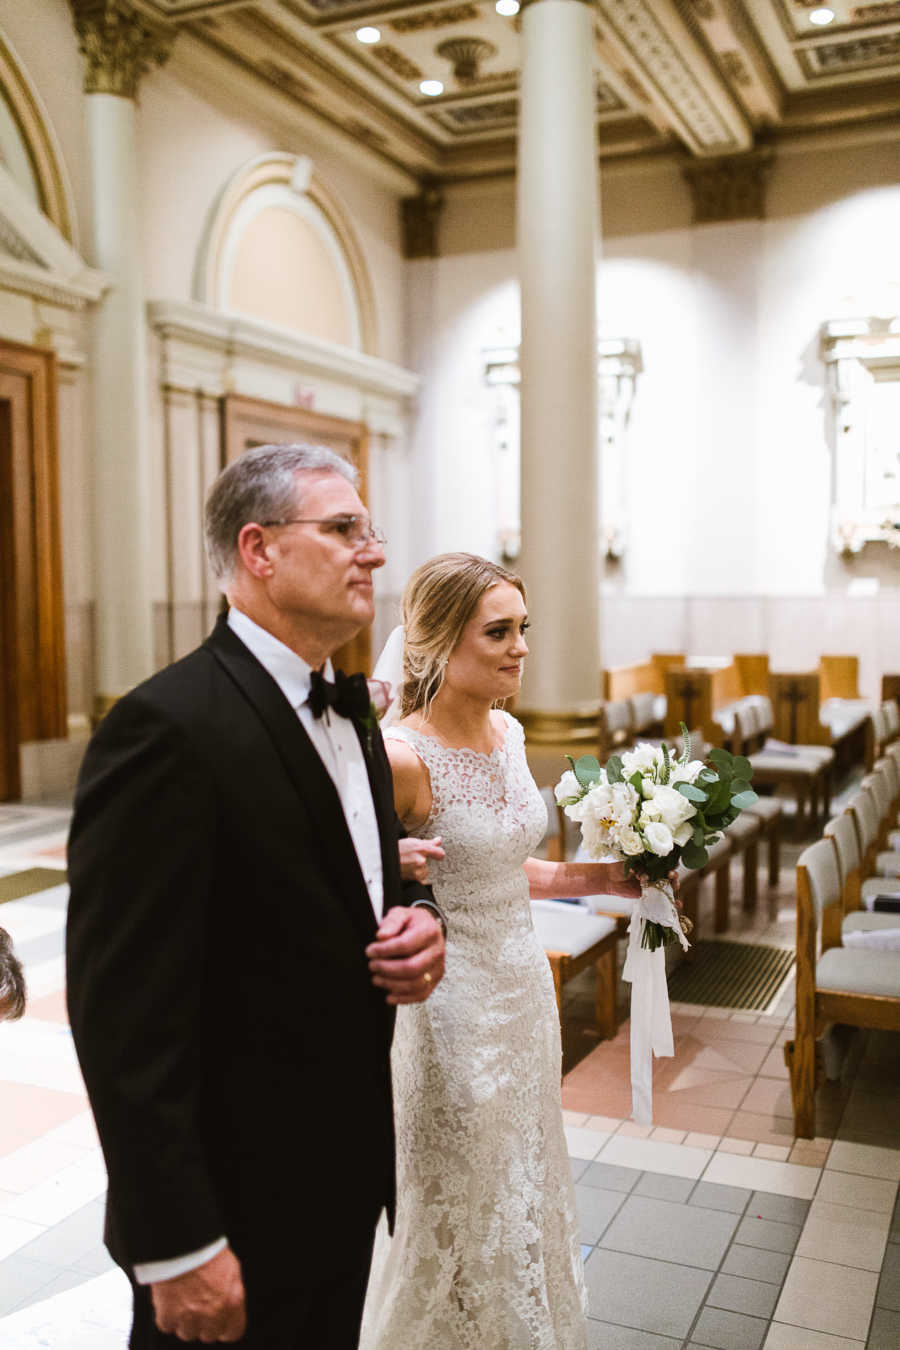 Bride and father stand arm in arm in aisle of church